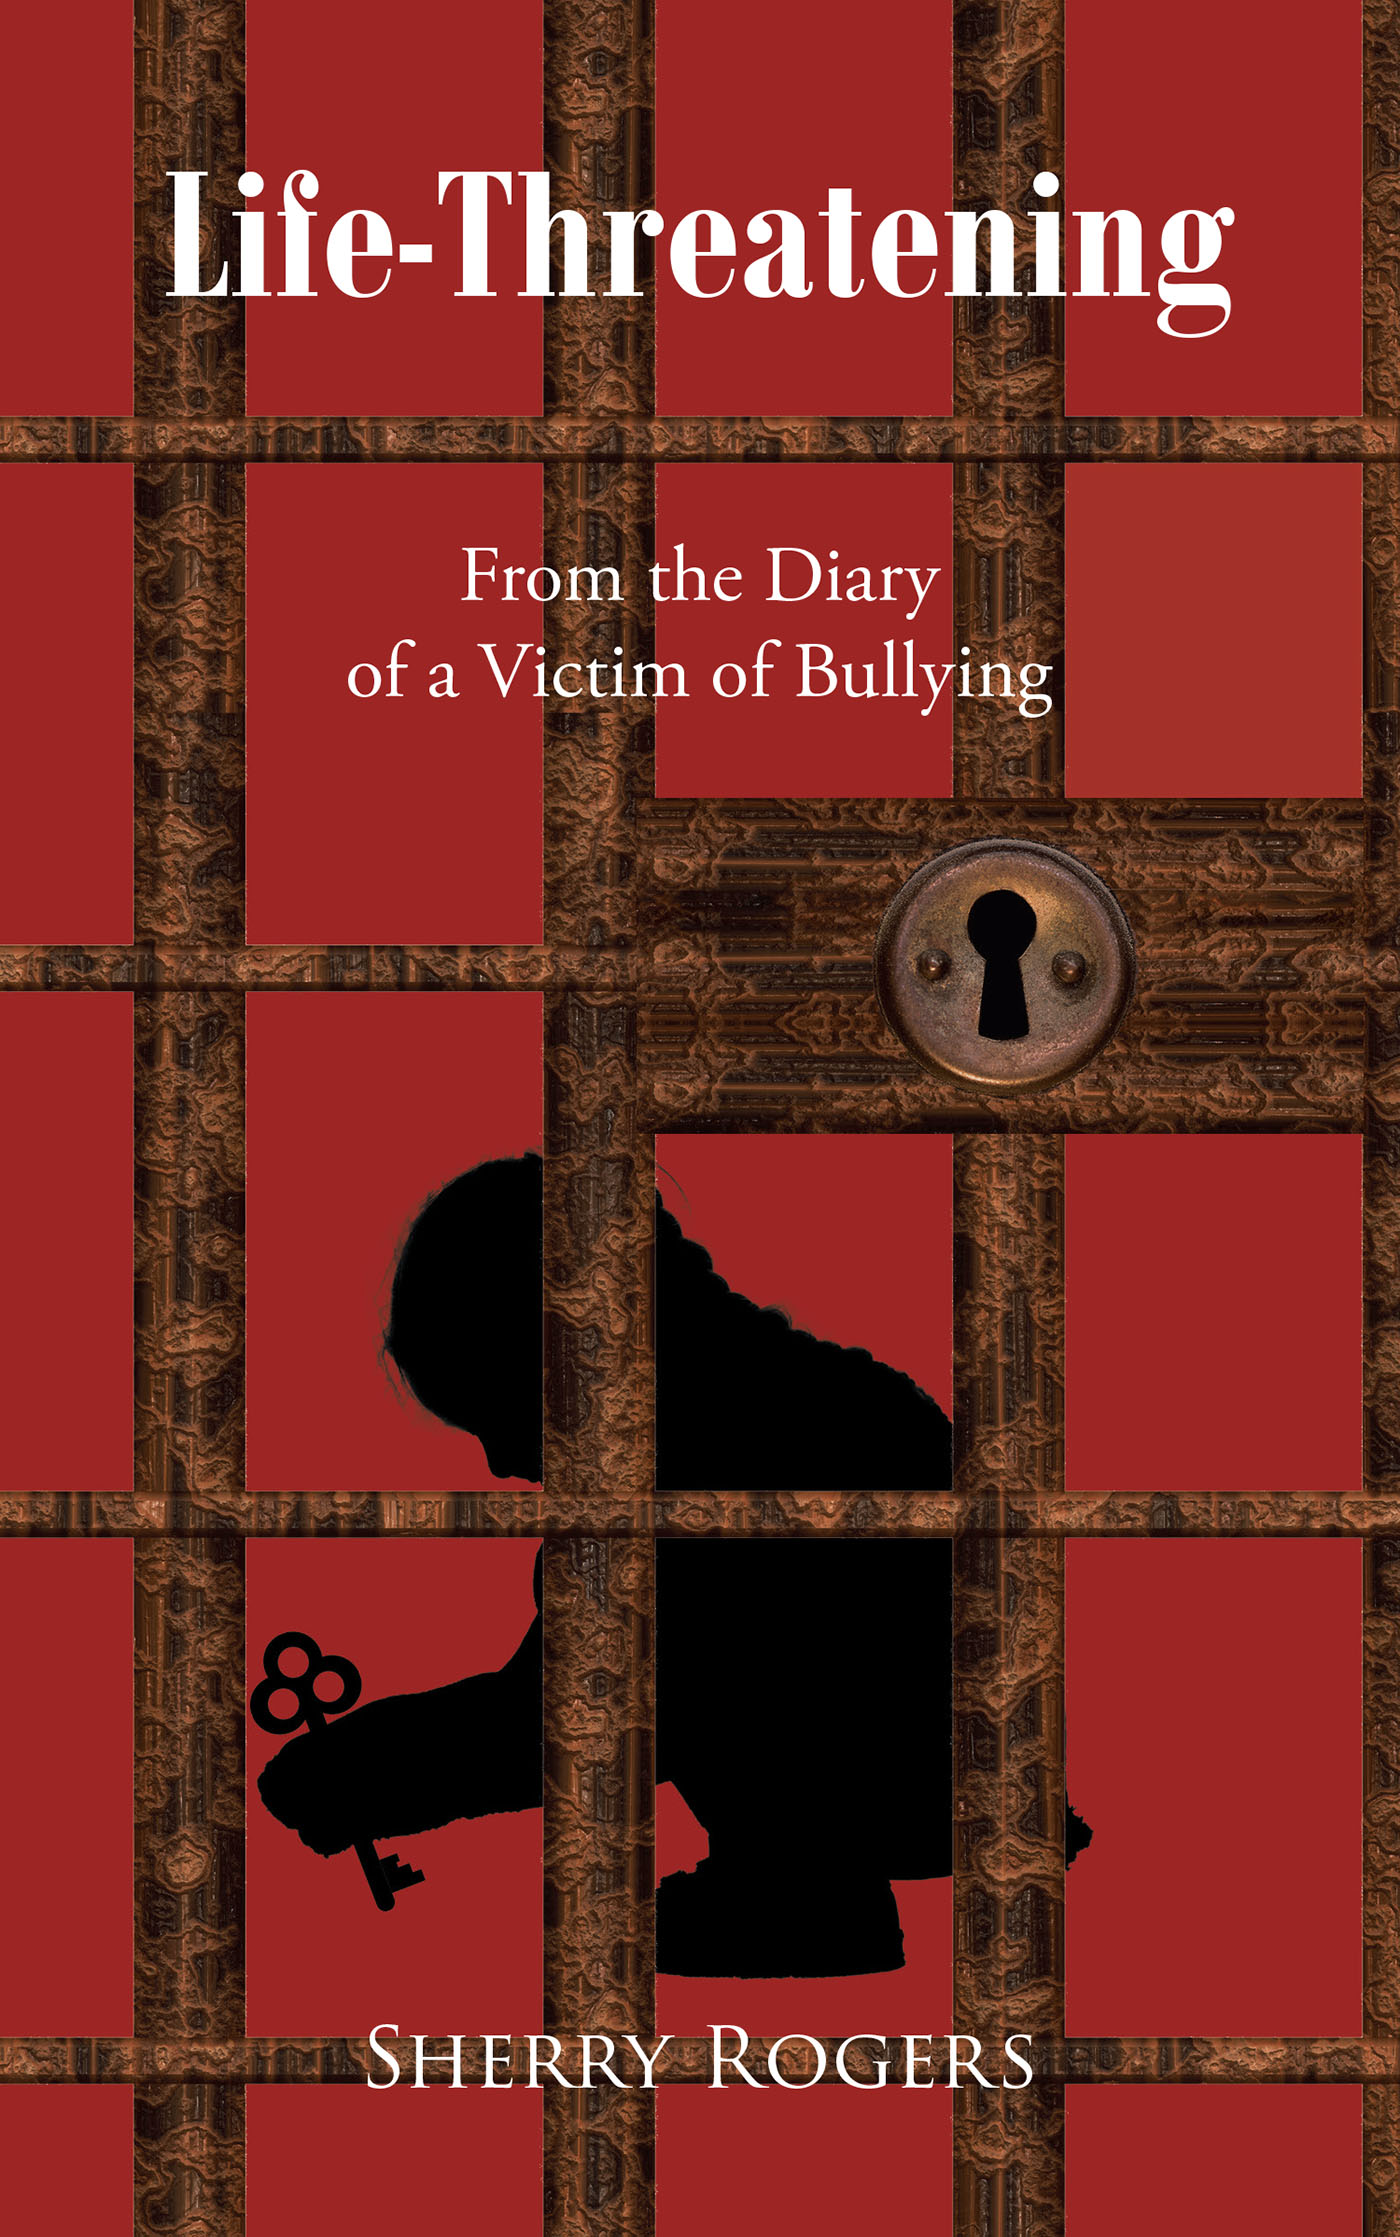 Sherry Rogers’s Newly Released "Life-Threatening: From the Diary of a Victim of Bullying" is an Impactful Look Into the Dangerous Realities of Being a Victim of Bullying